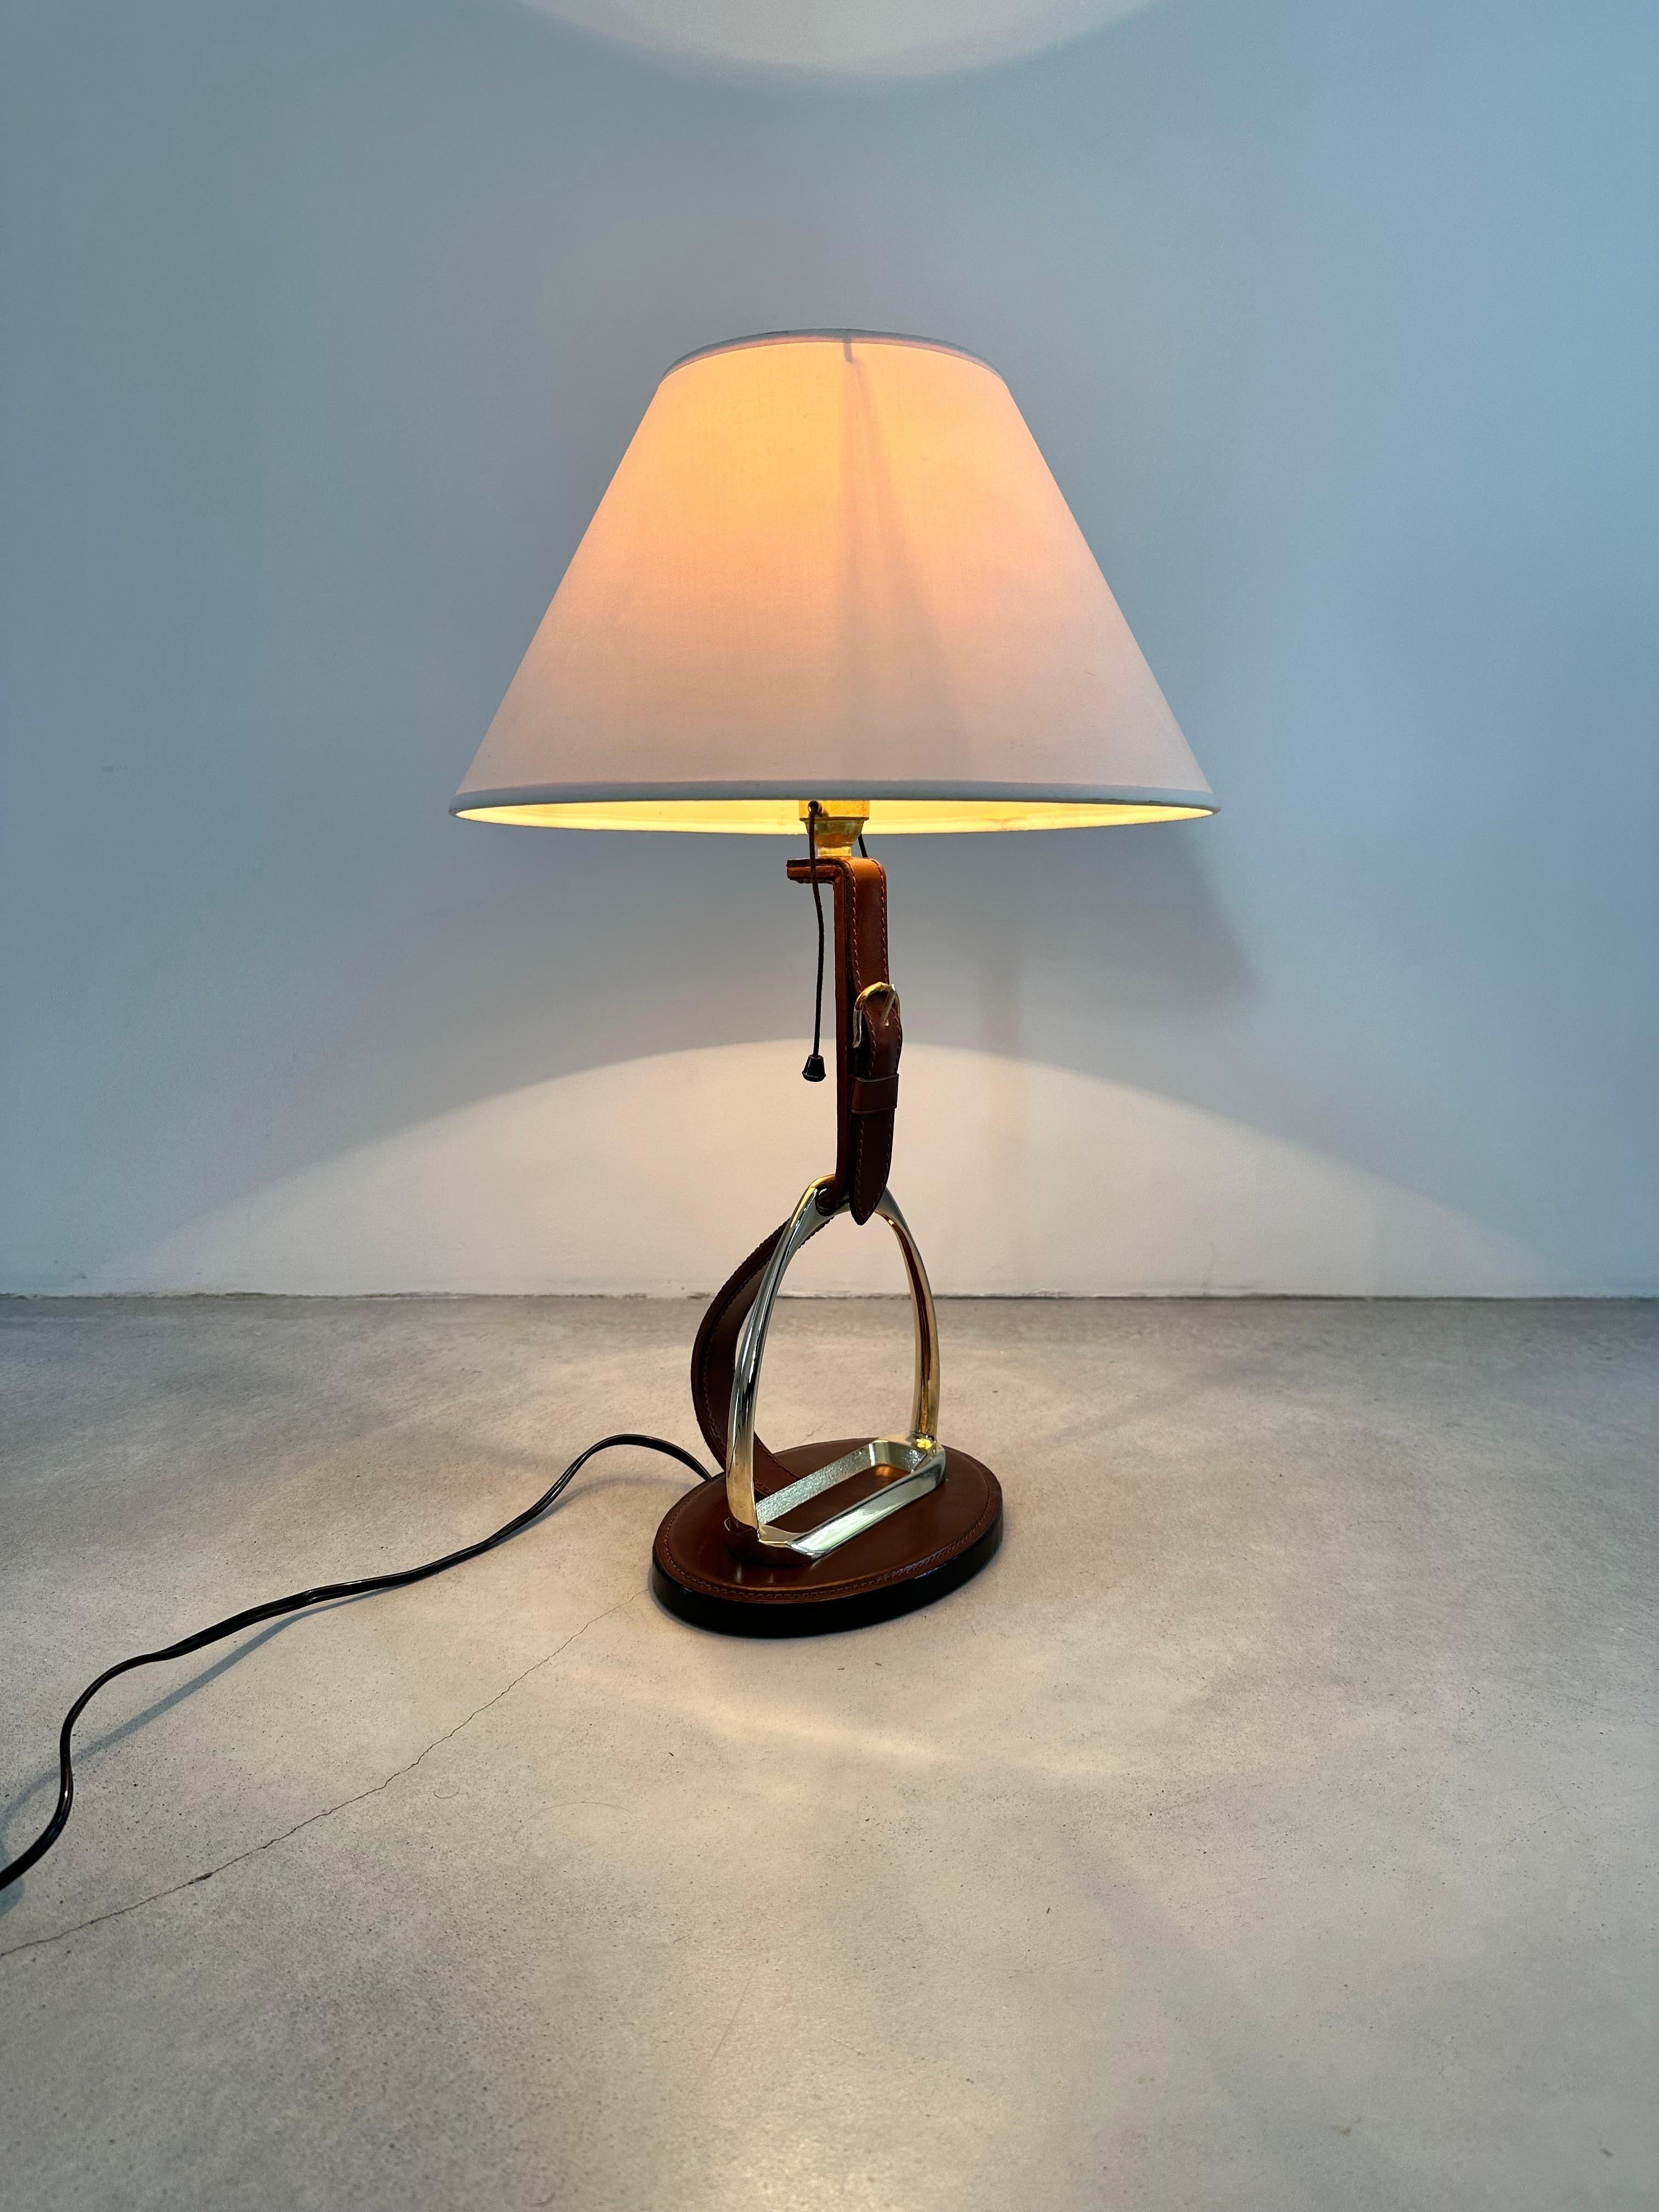 Longchamp design, French Brass & Equestrian Stitched Leather Lamp, 1960s For Sale 2